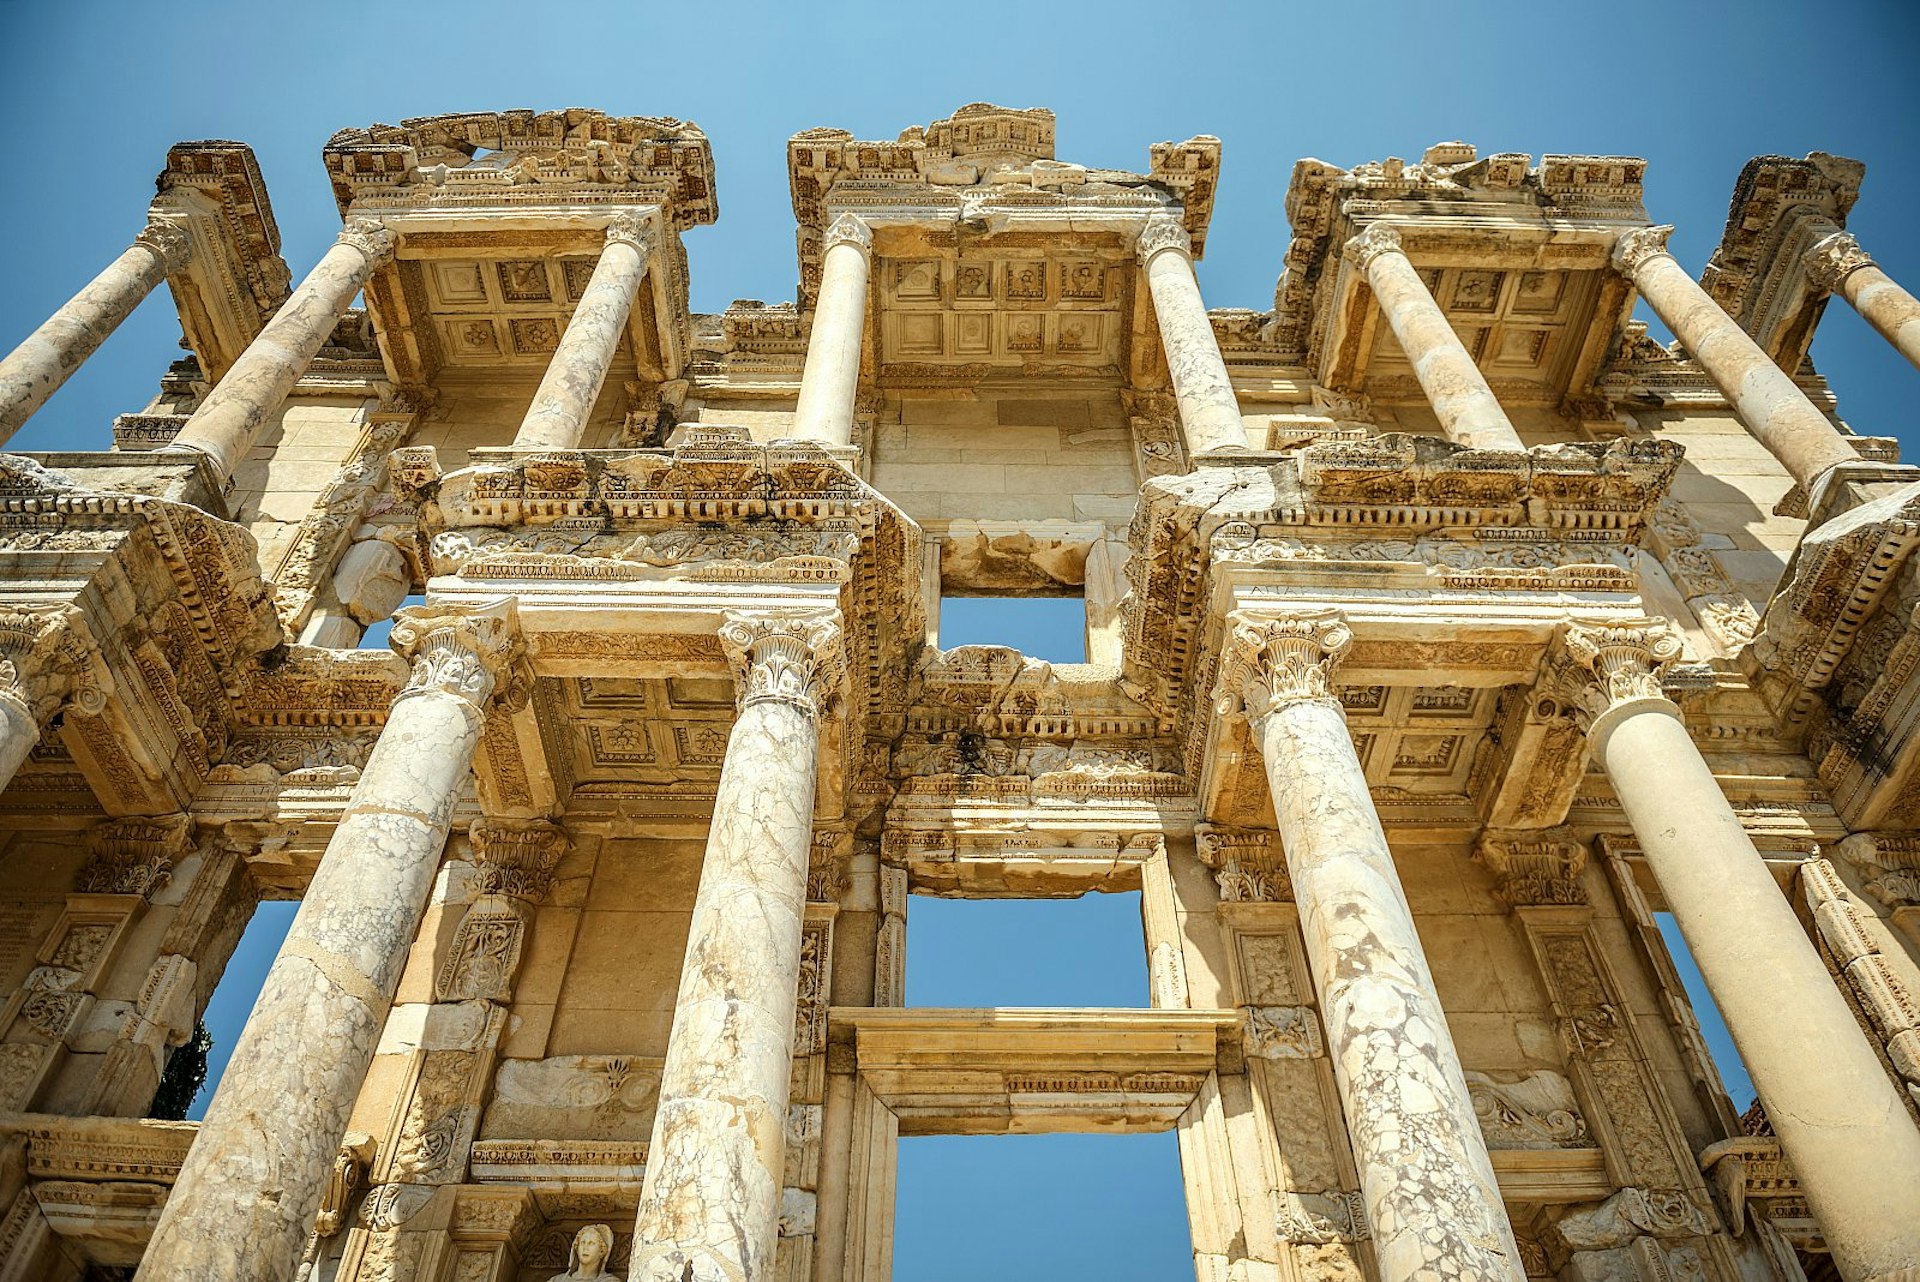 Pillared façade of the Library of Celsus at Ephesus, Turkey